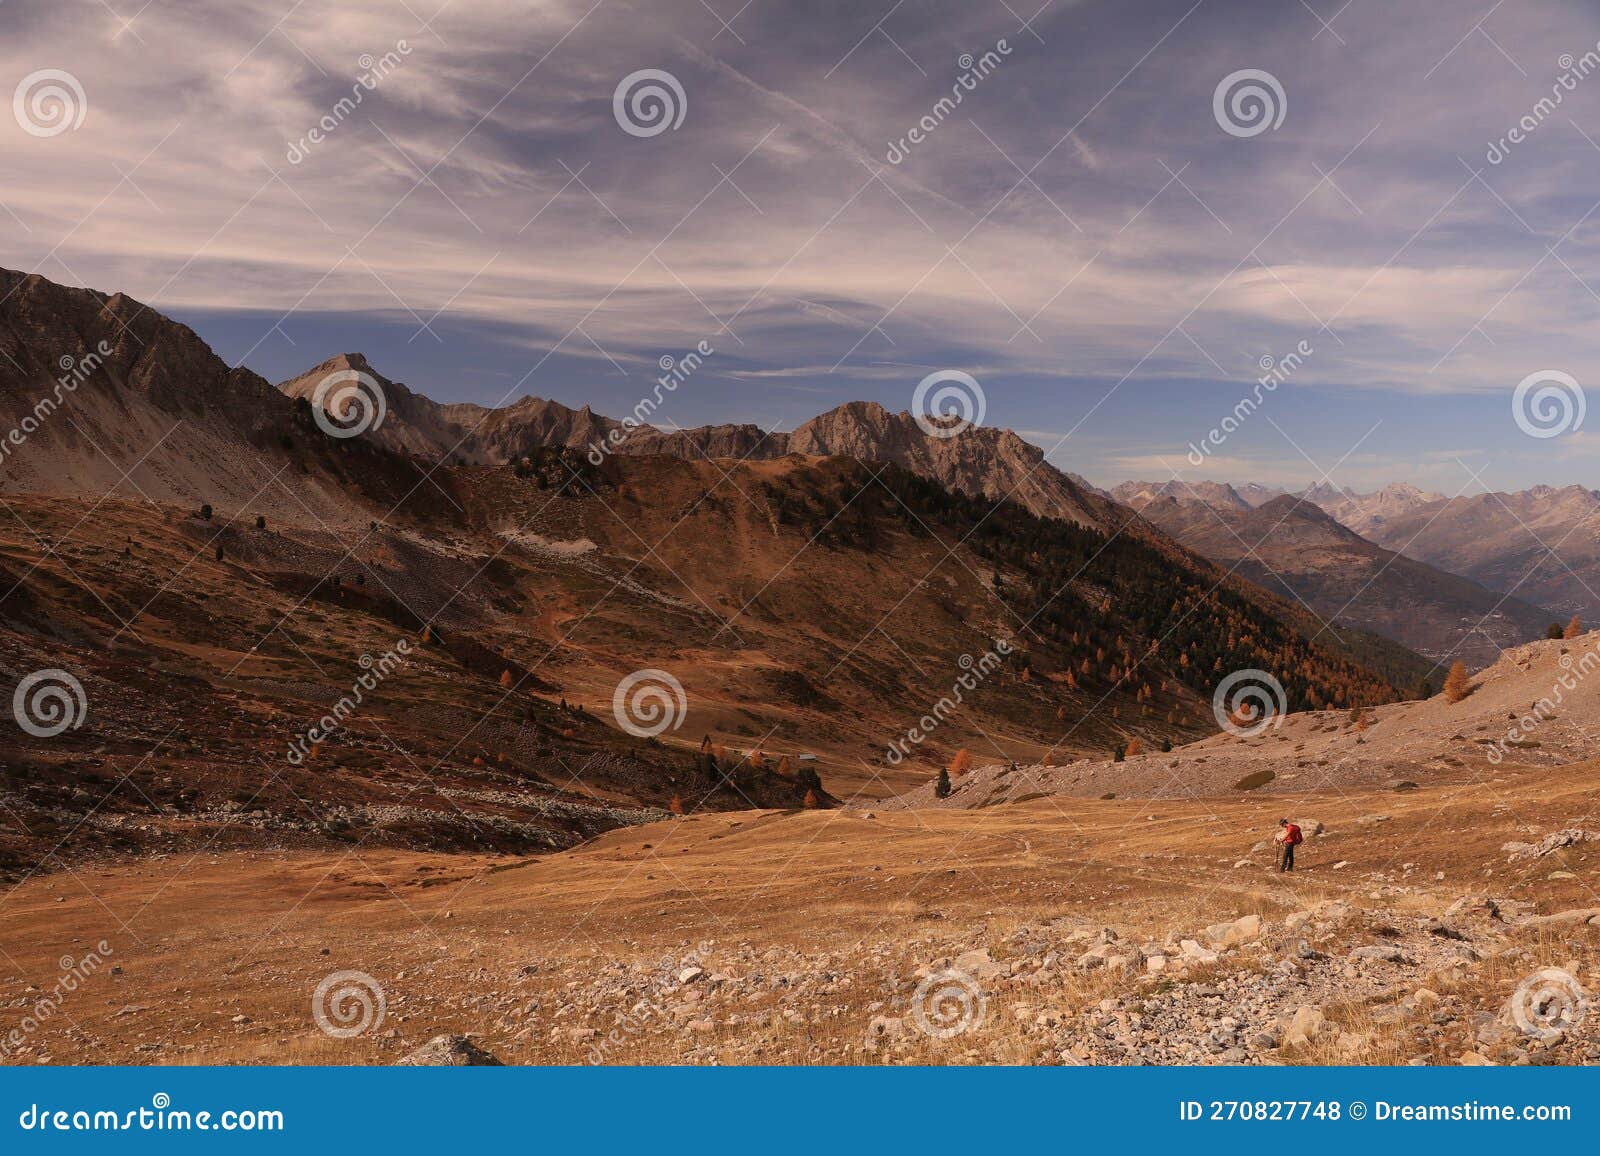 a hiker going down towards a valley in the rocky mountains in the autumn with clouy sky